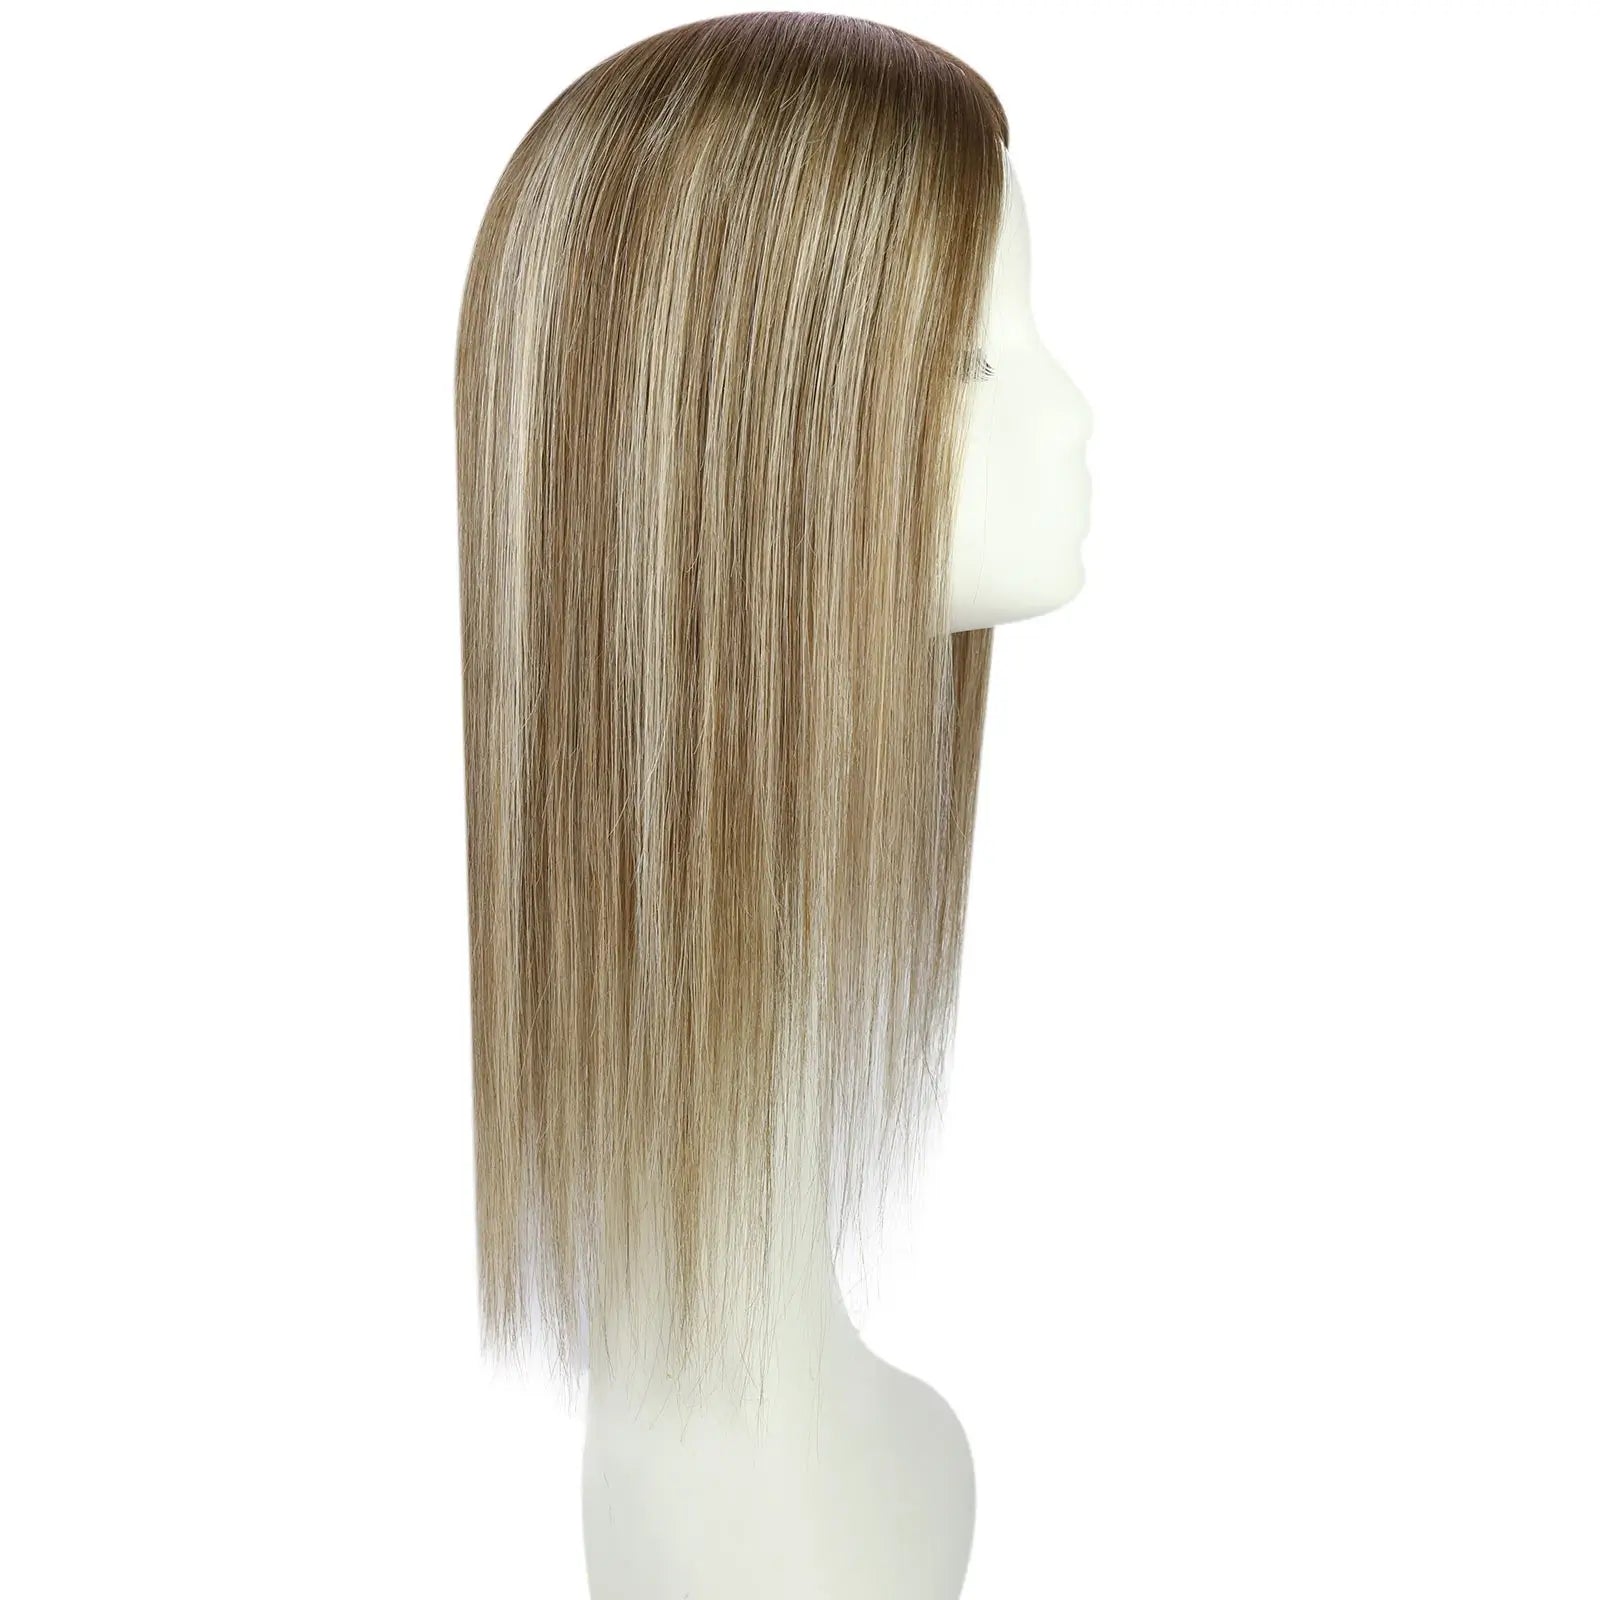 100% human hair topper for women balayage brown with blonde